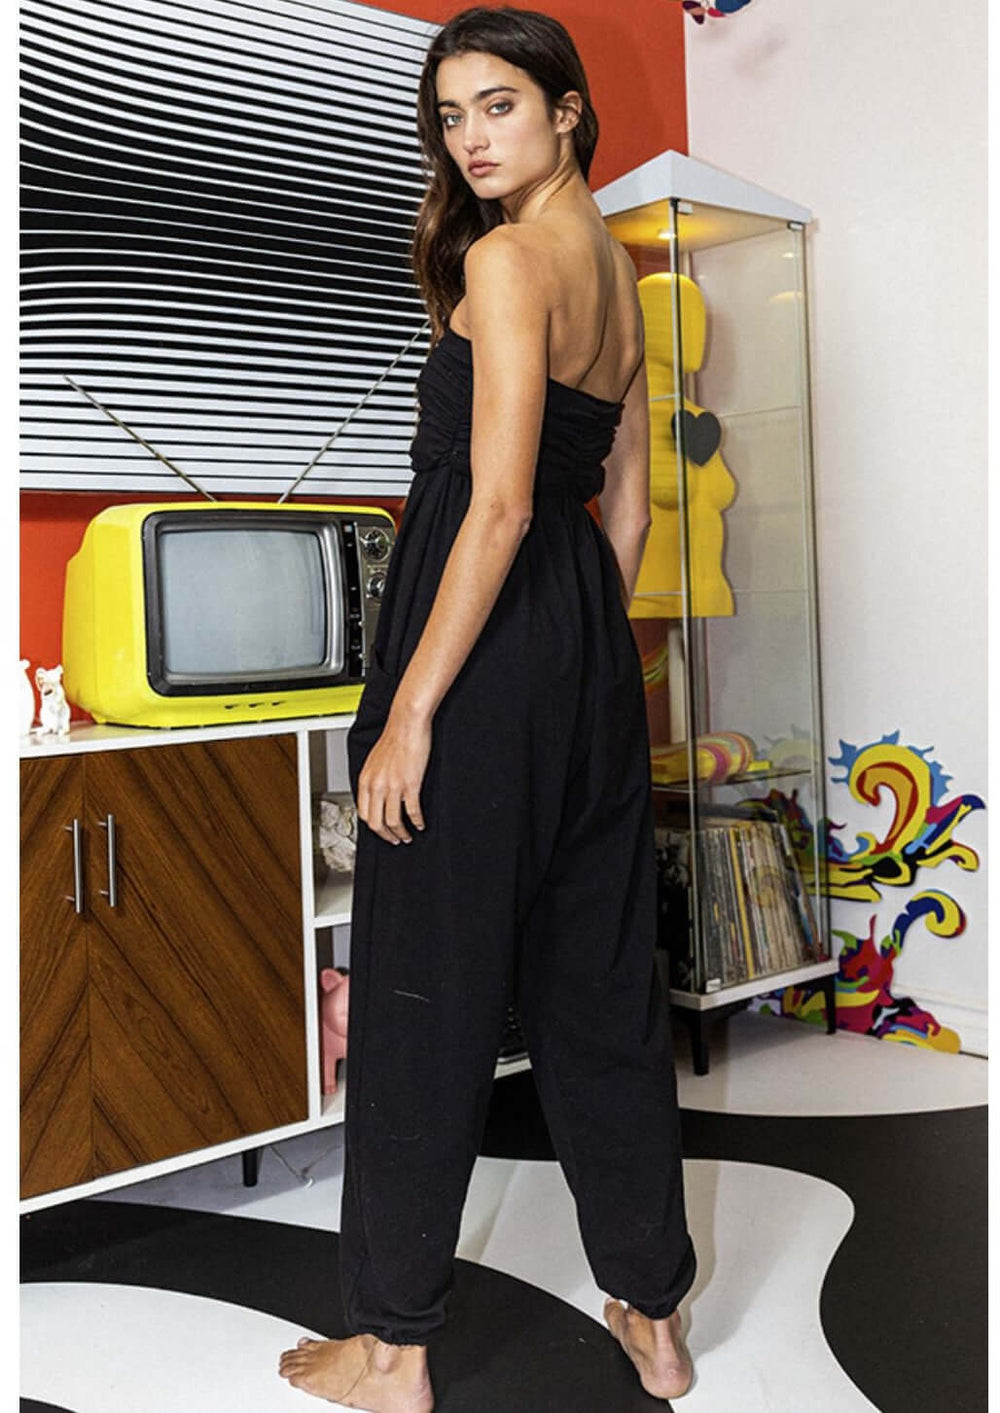 Bucket List Style# R5290 Ladies Strapless Black Ruched Jumpsuit with Drop Crotch  | Made in USA | Class Cozy Cool Women's Made in America Boutique